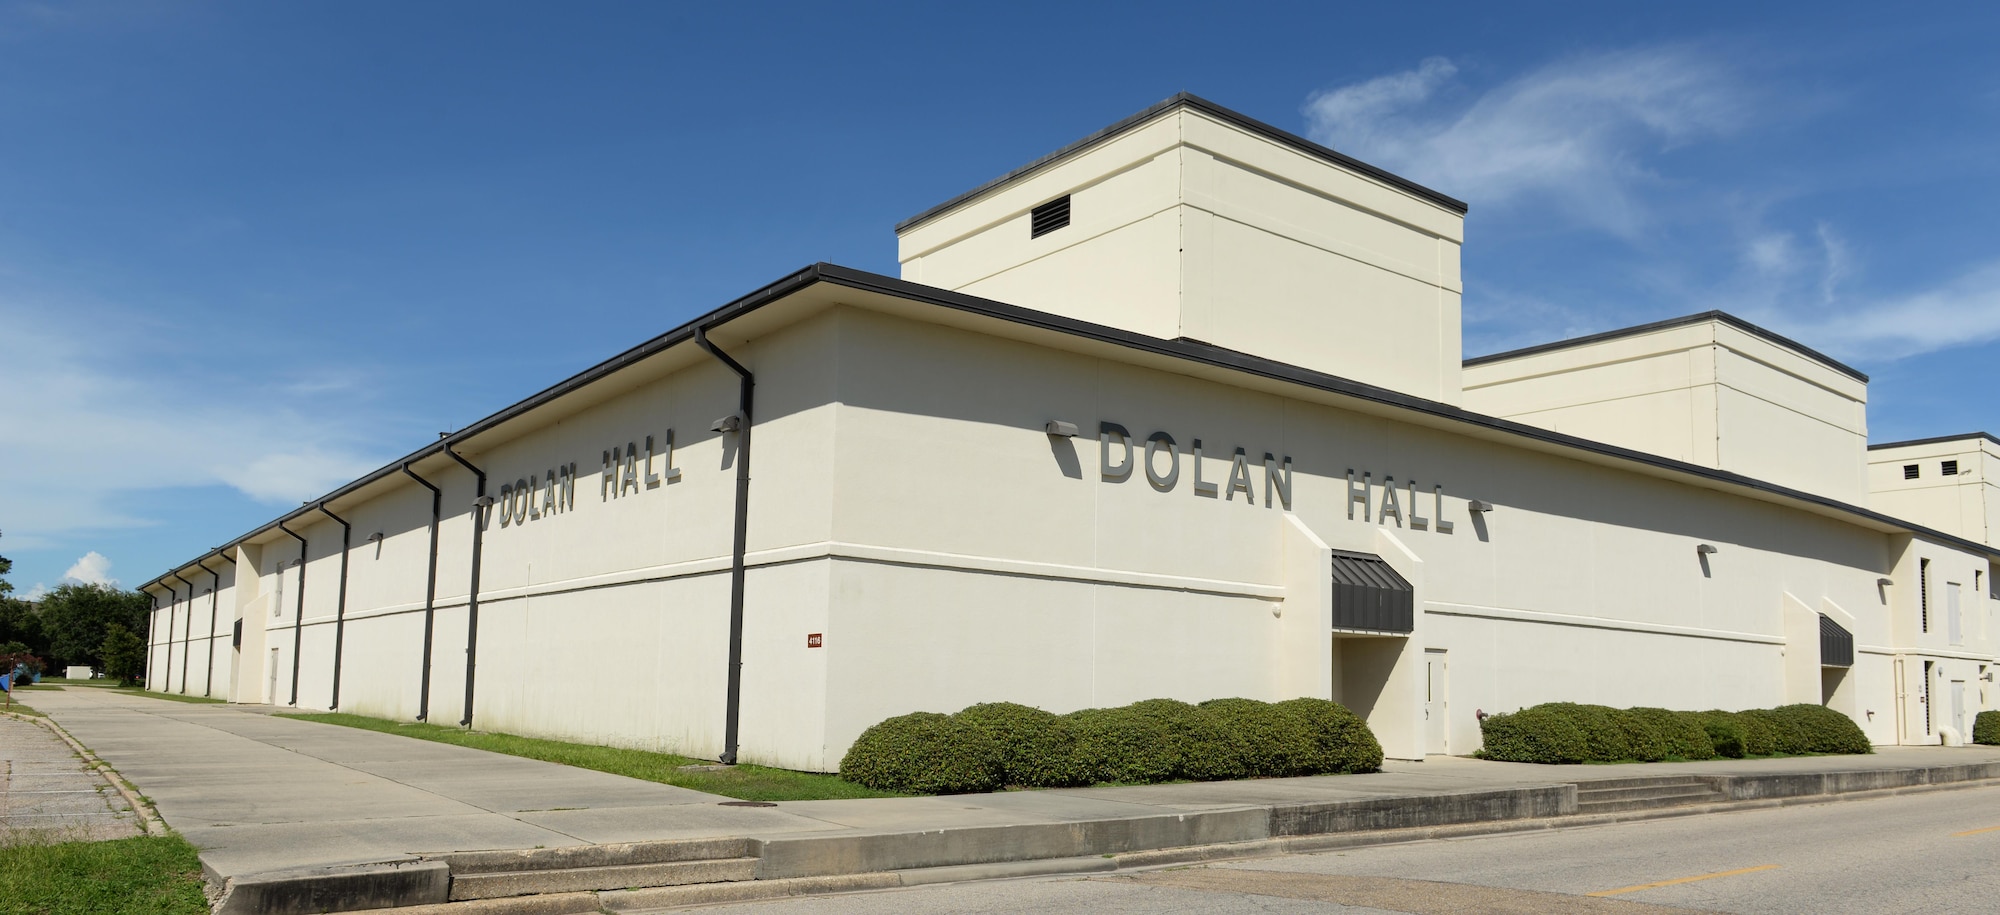 Dolan Hall is located on Hangar Rd. and D St., Bldg. 4115. Today, thousands of Airmen from the 333rd, 334th, 336th, and 338th Training Squadrons pass through this building annually and take what they learn and apply it at their next base. Dolan Hall also houses the Sexual Assault Prevention and Response Office, who can be reached on their hotline at (228) 377-7278. (U.S. Air Force photo by 2nd Lt. Toney Doan)